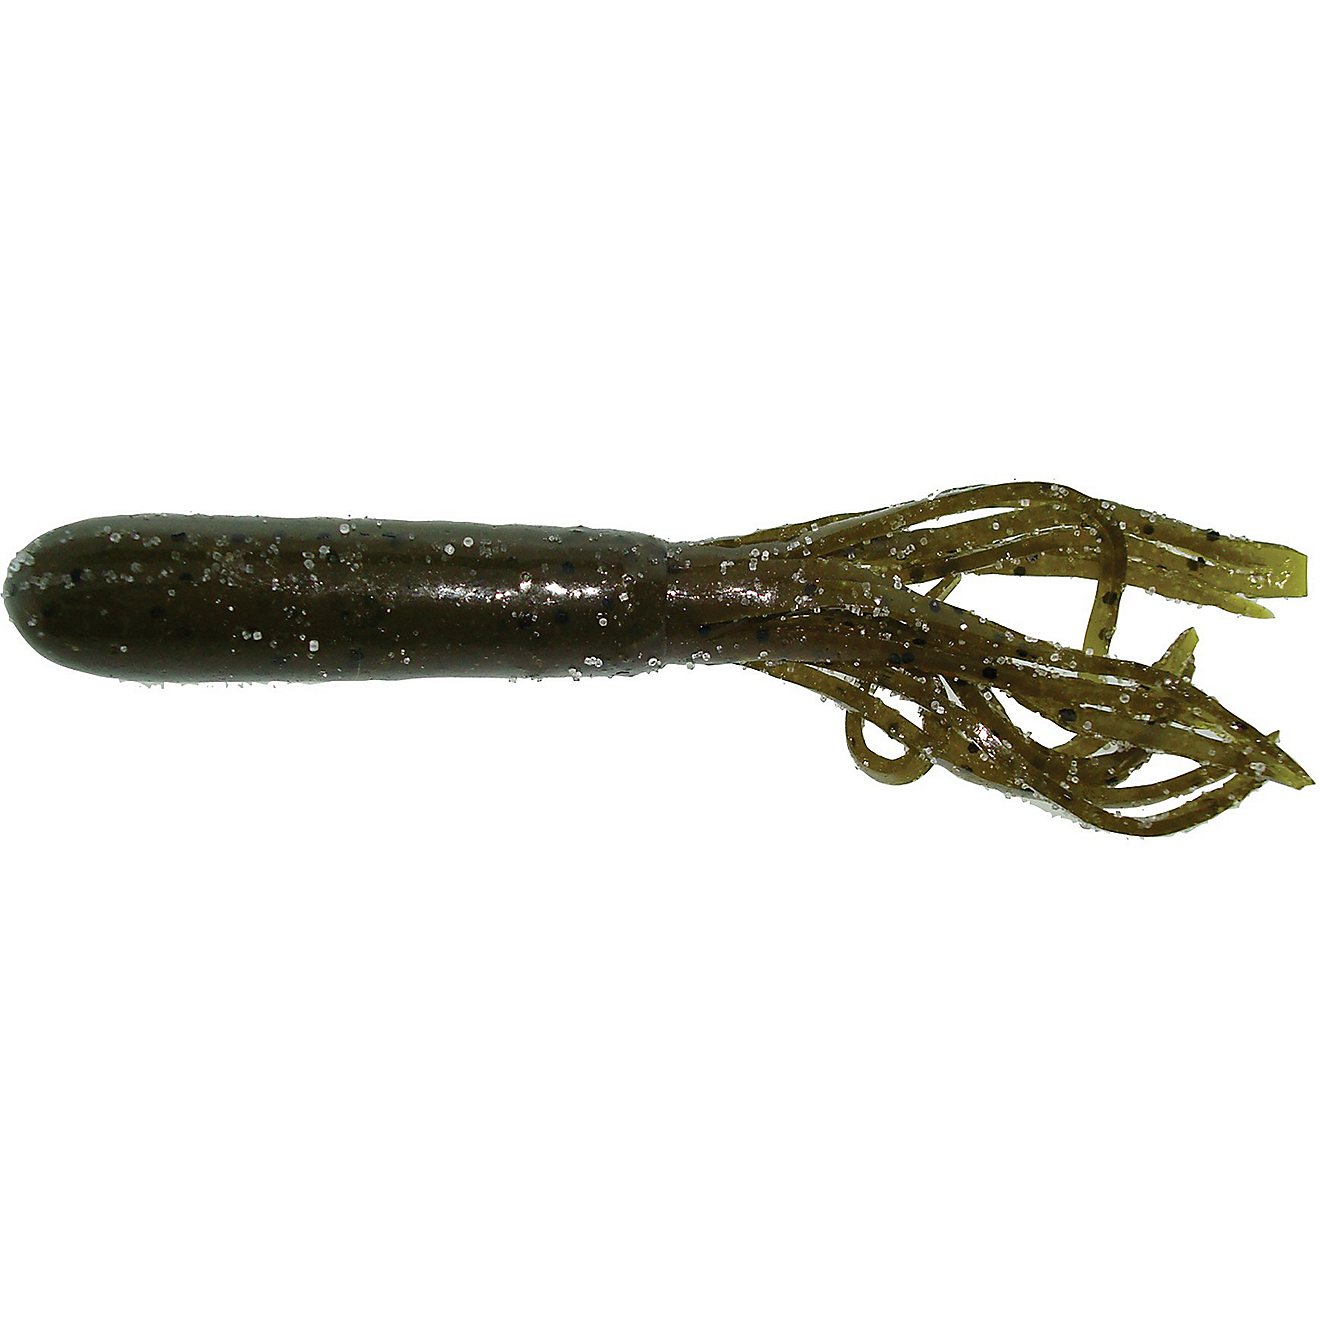 Mizmo Big Boy 4 in Tube Soft Plastic Baits 10-Pack                                                                               - view number 1